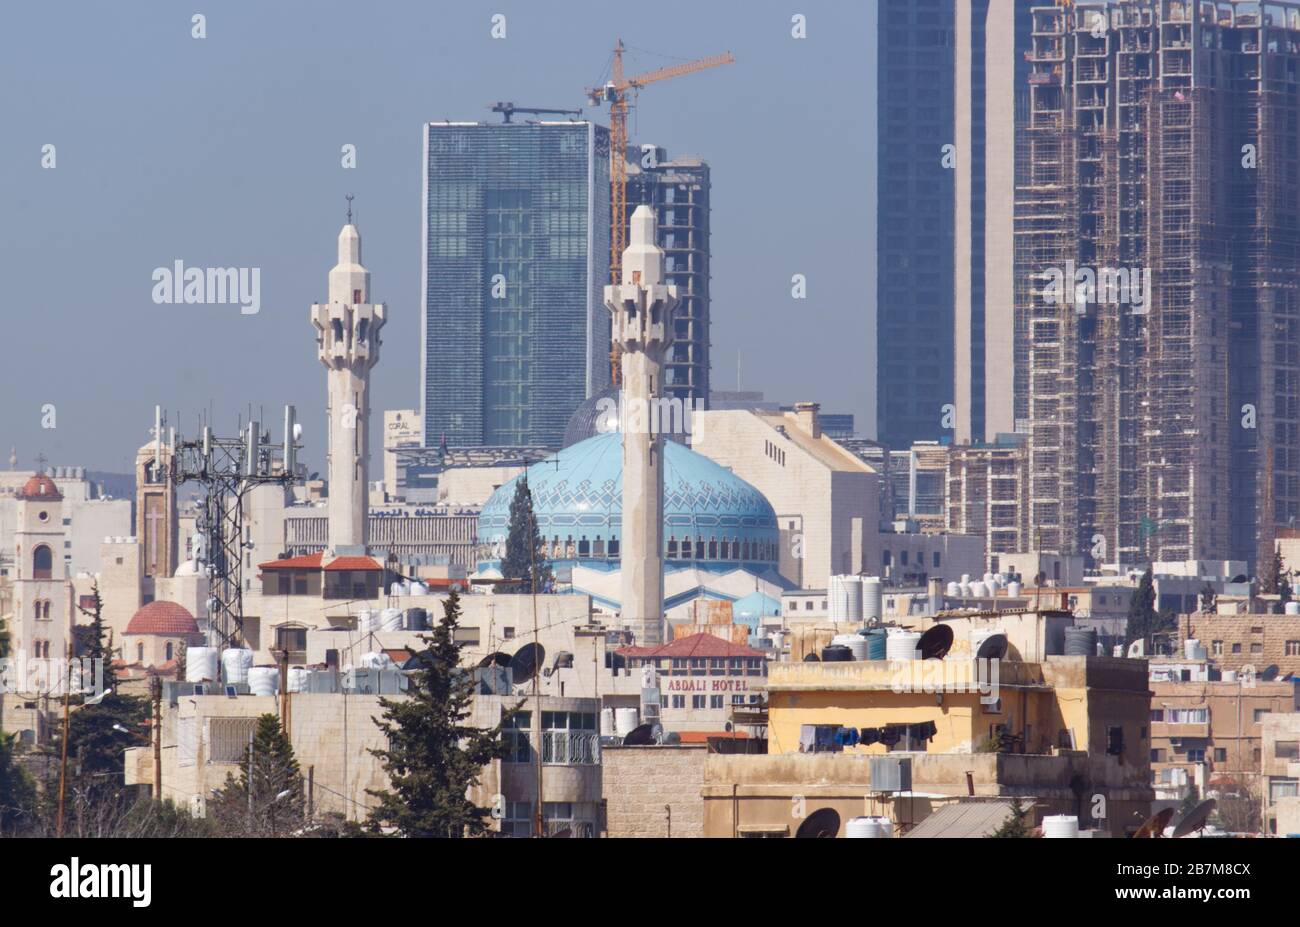 Amman / Jordan - 7 March 2020: New skyscrapers are being built near the King Abdullah mosque in the centre of Amman in the Abdali suburb Stock Photo